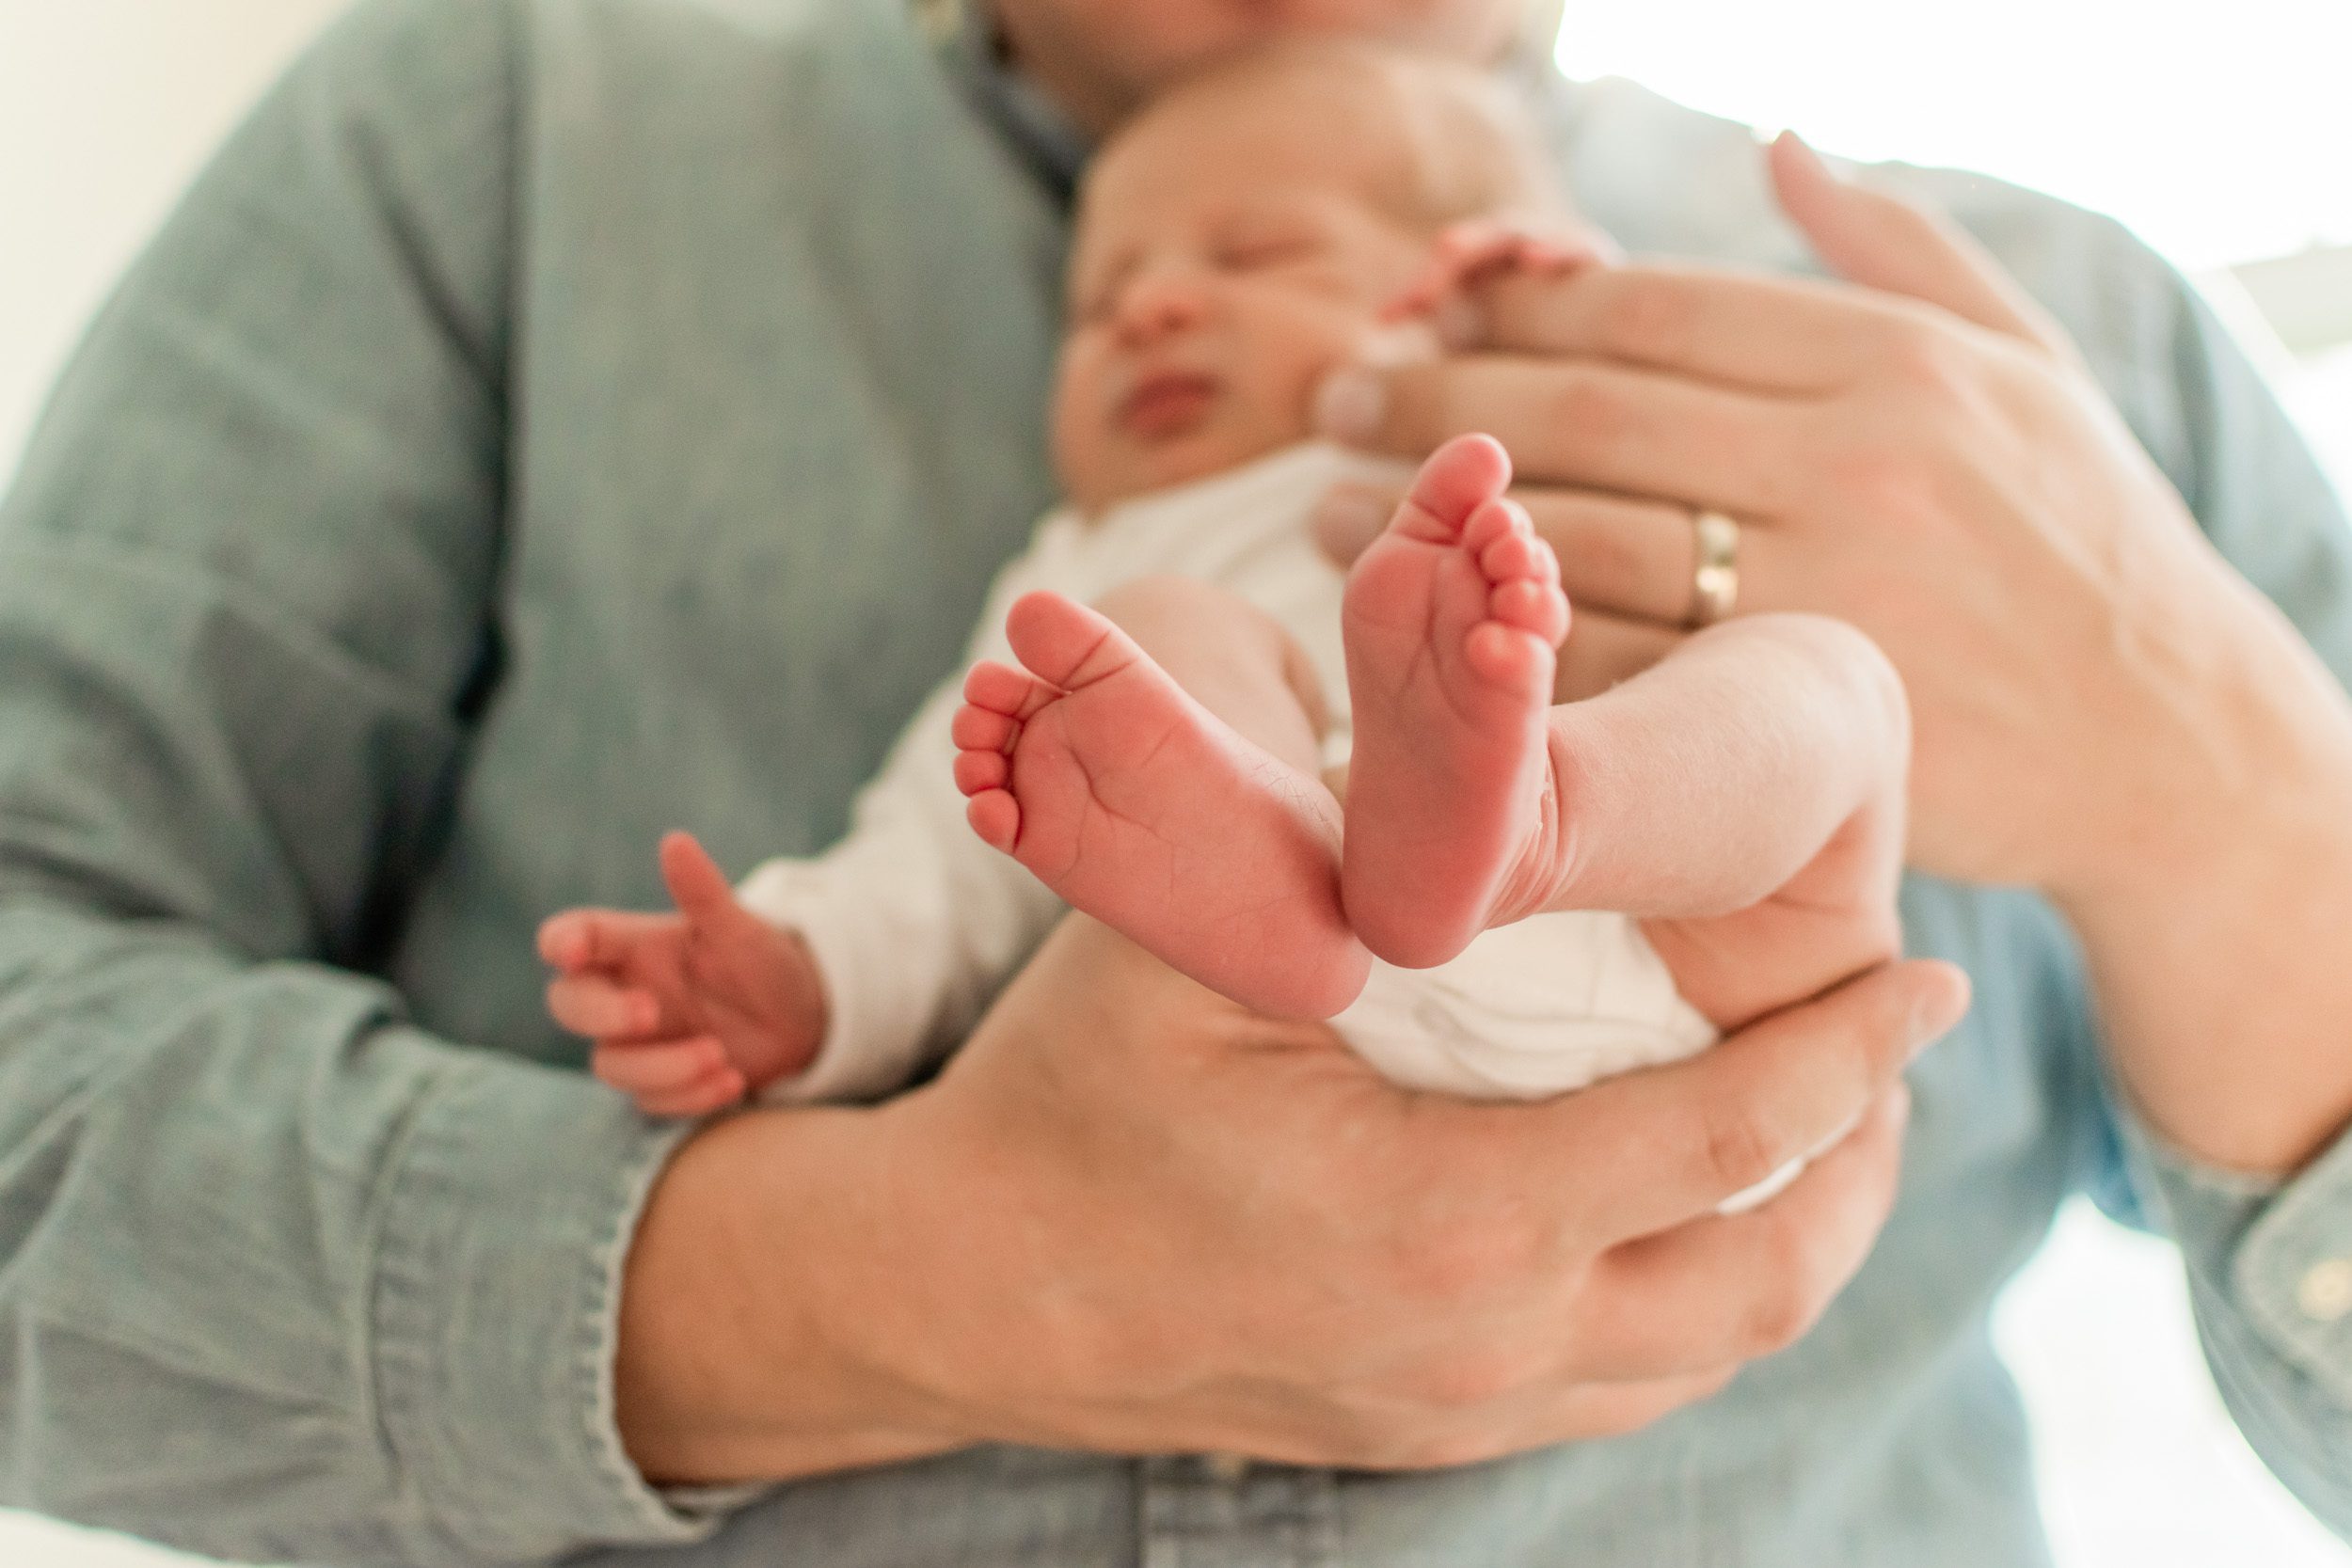 Close up photo of newborn boy's feet while dad holds him in his arms during an in home newborn photo session